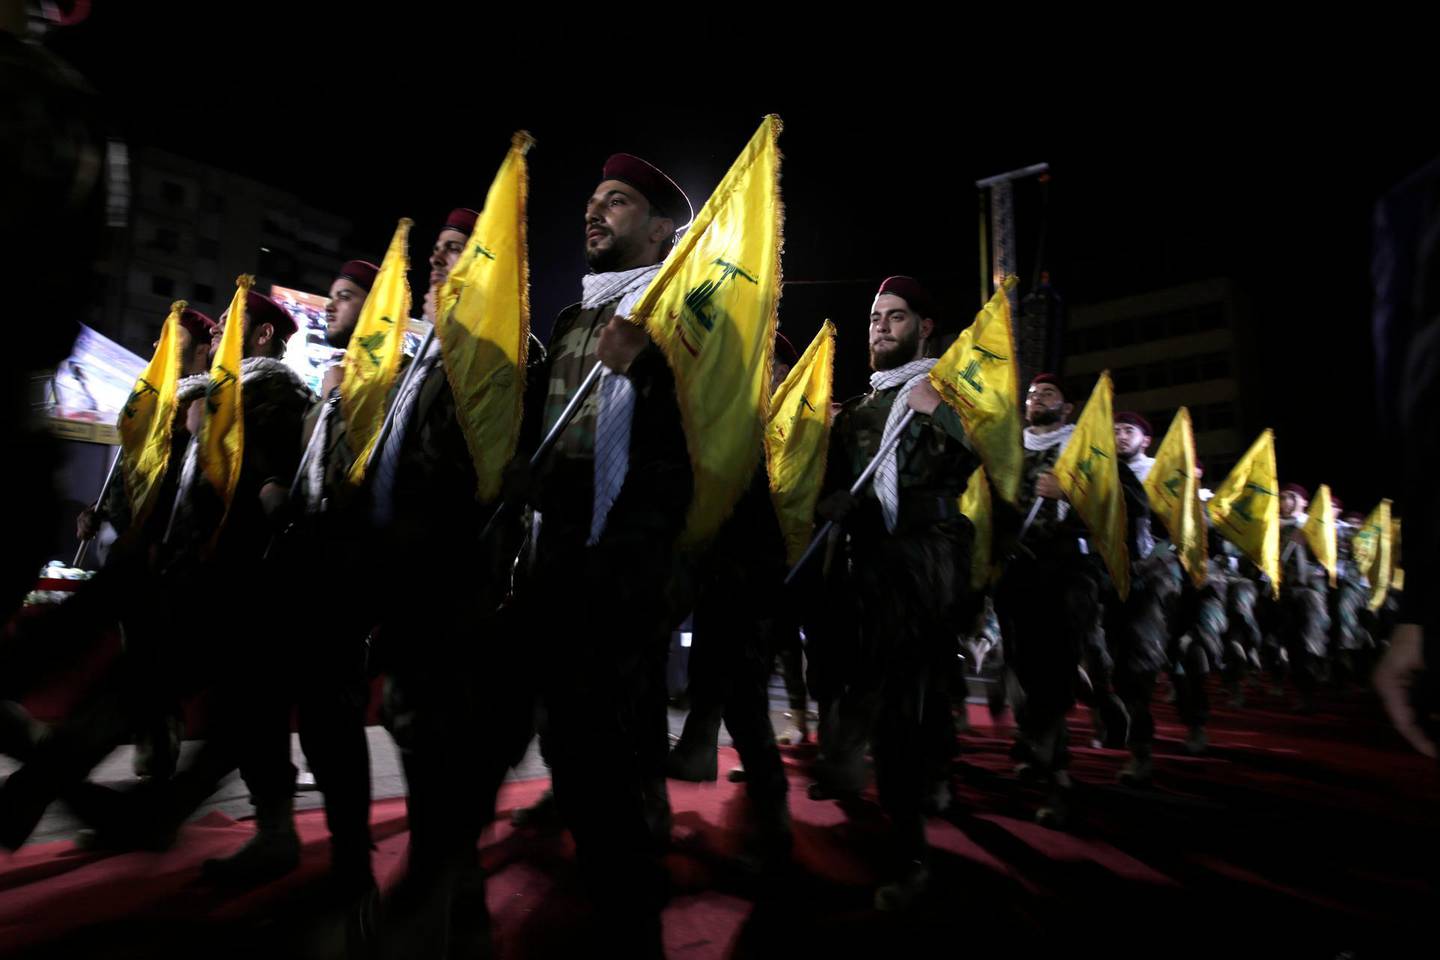 FILE - In this May 31, 2019 file photo, Hezbollah fighters march at a rally to mark Jerusalem day or Al-Quds day, in the southern Beirut suburb of Dahiyeh, Lebanon. An economic meltdown, a revolution, financial collapse, a virus outbreak and a cataclysmic explosion that virtually wiped out the country's main port. The past year has been nothing short of an earthquake for tiny Lebanon, with an economic meltdown, mass protests, financial collapse, a virus outbreak and a cataclysmic explosion that virtually wiped out the countryâ€™s main port. Yet Lebanese fear even darker days are ahead. (AP Photo/Hassan Ammar, File)